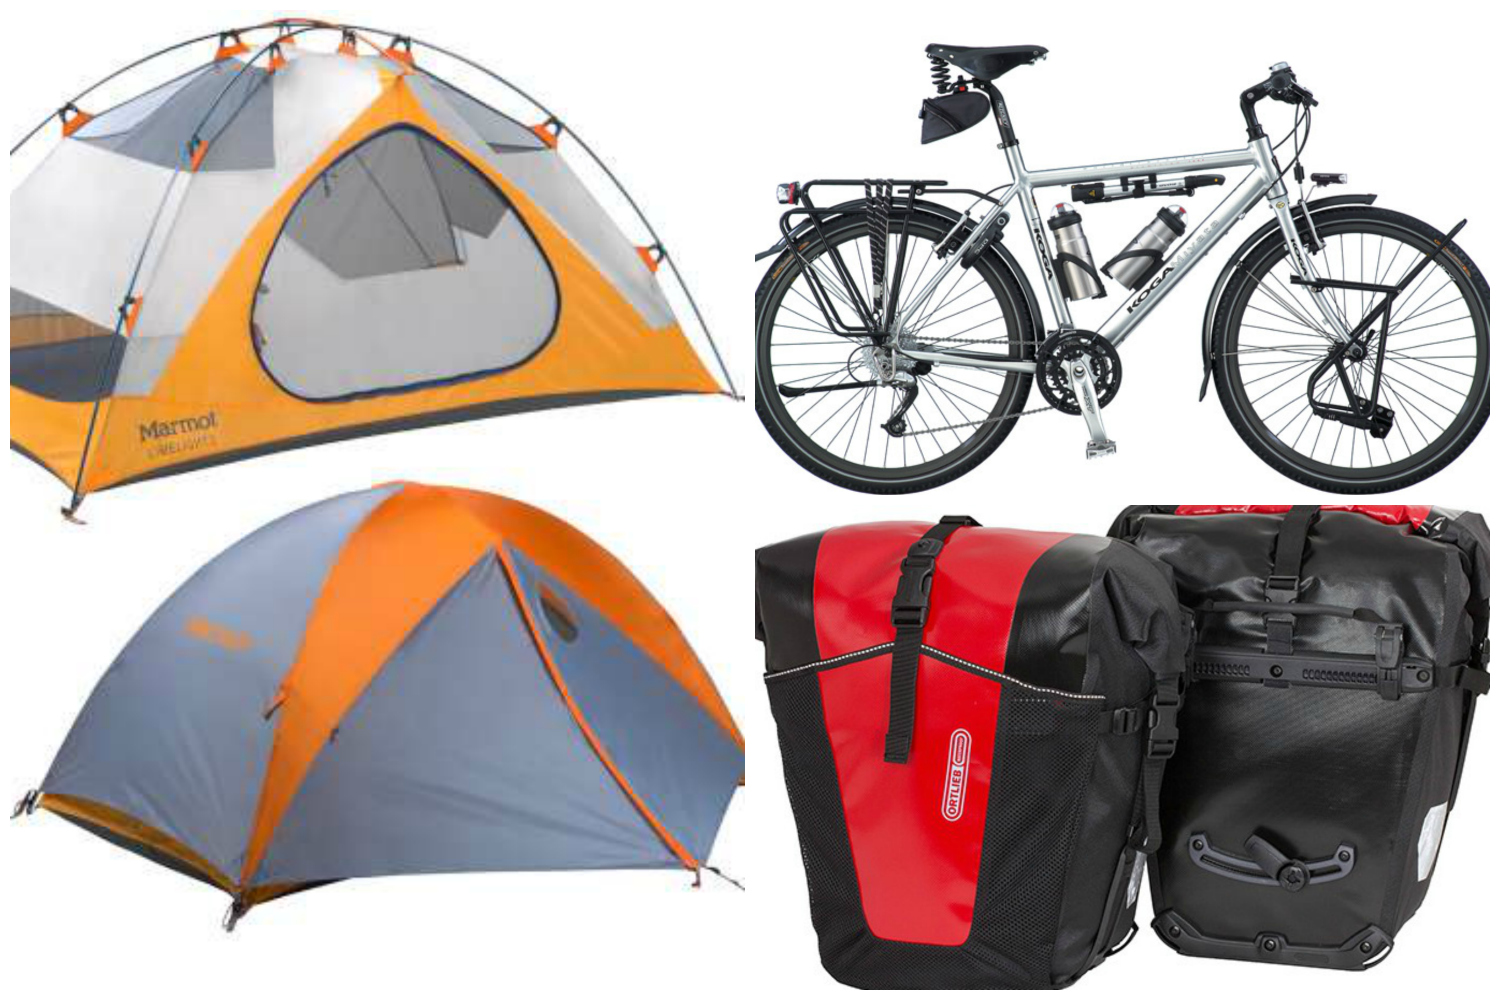 carrying tent on bike